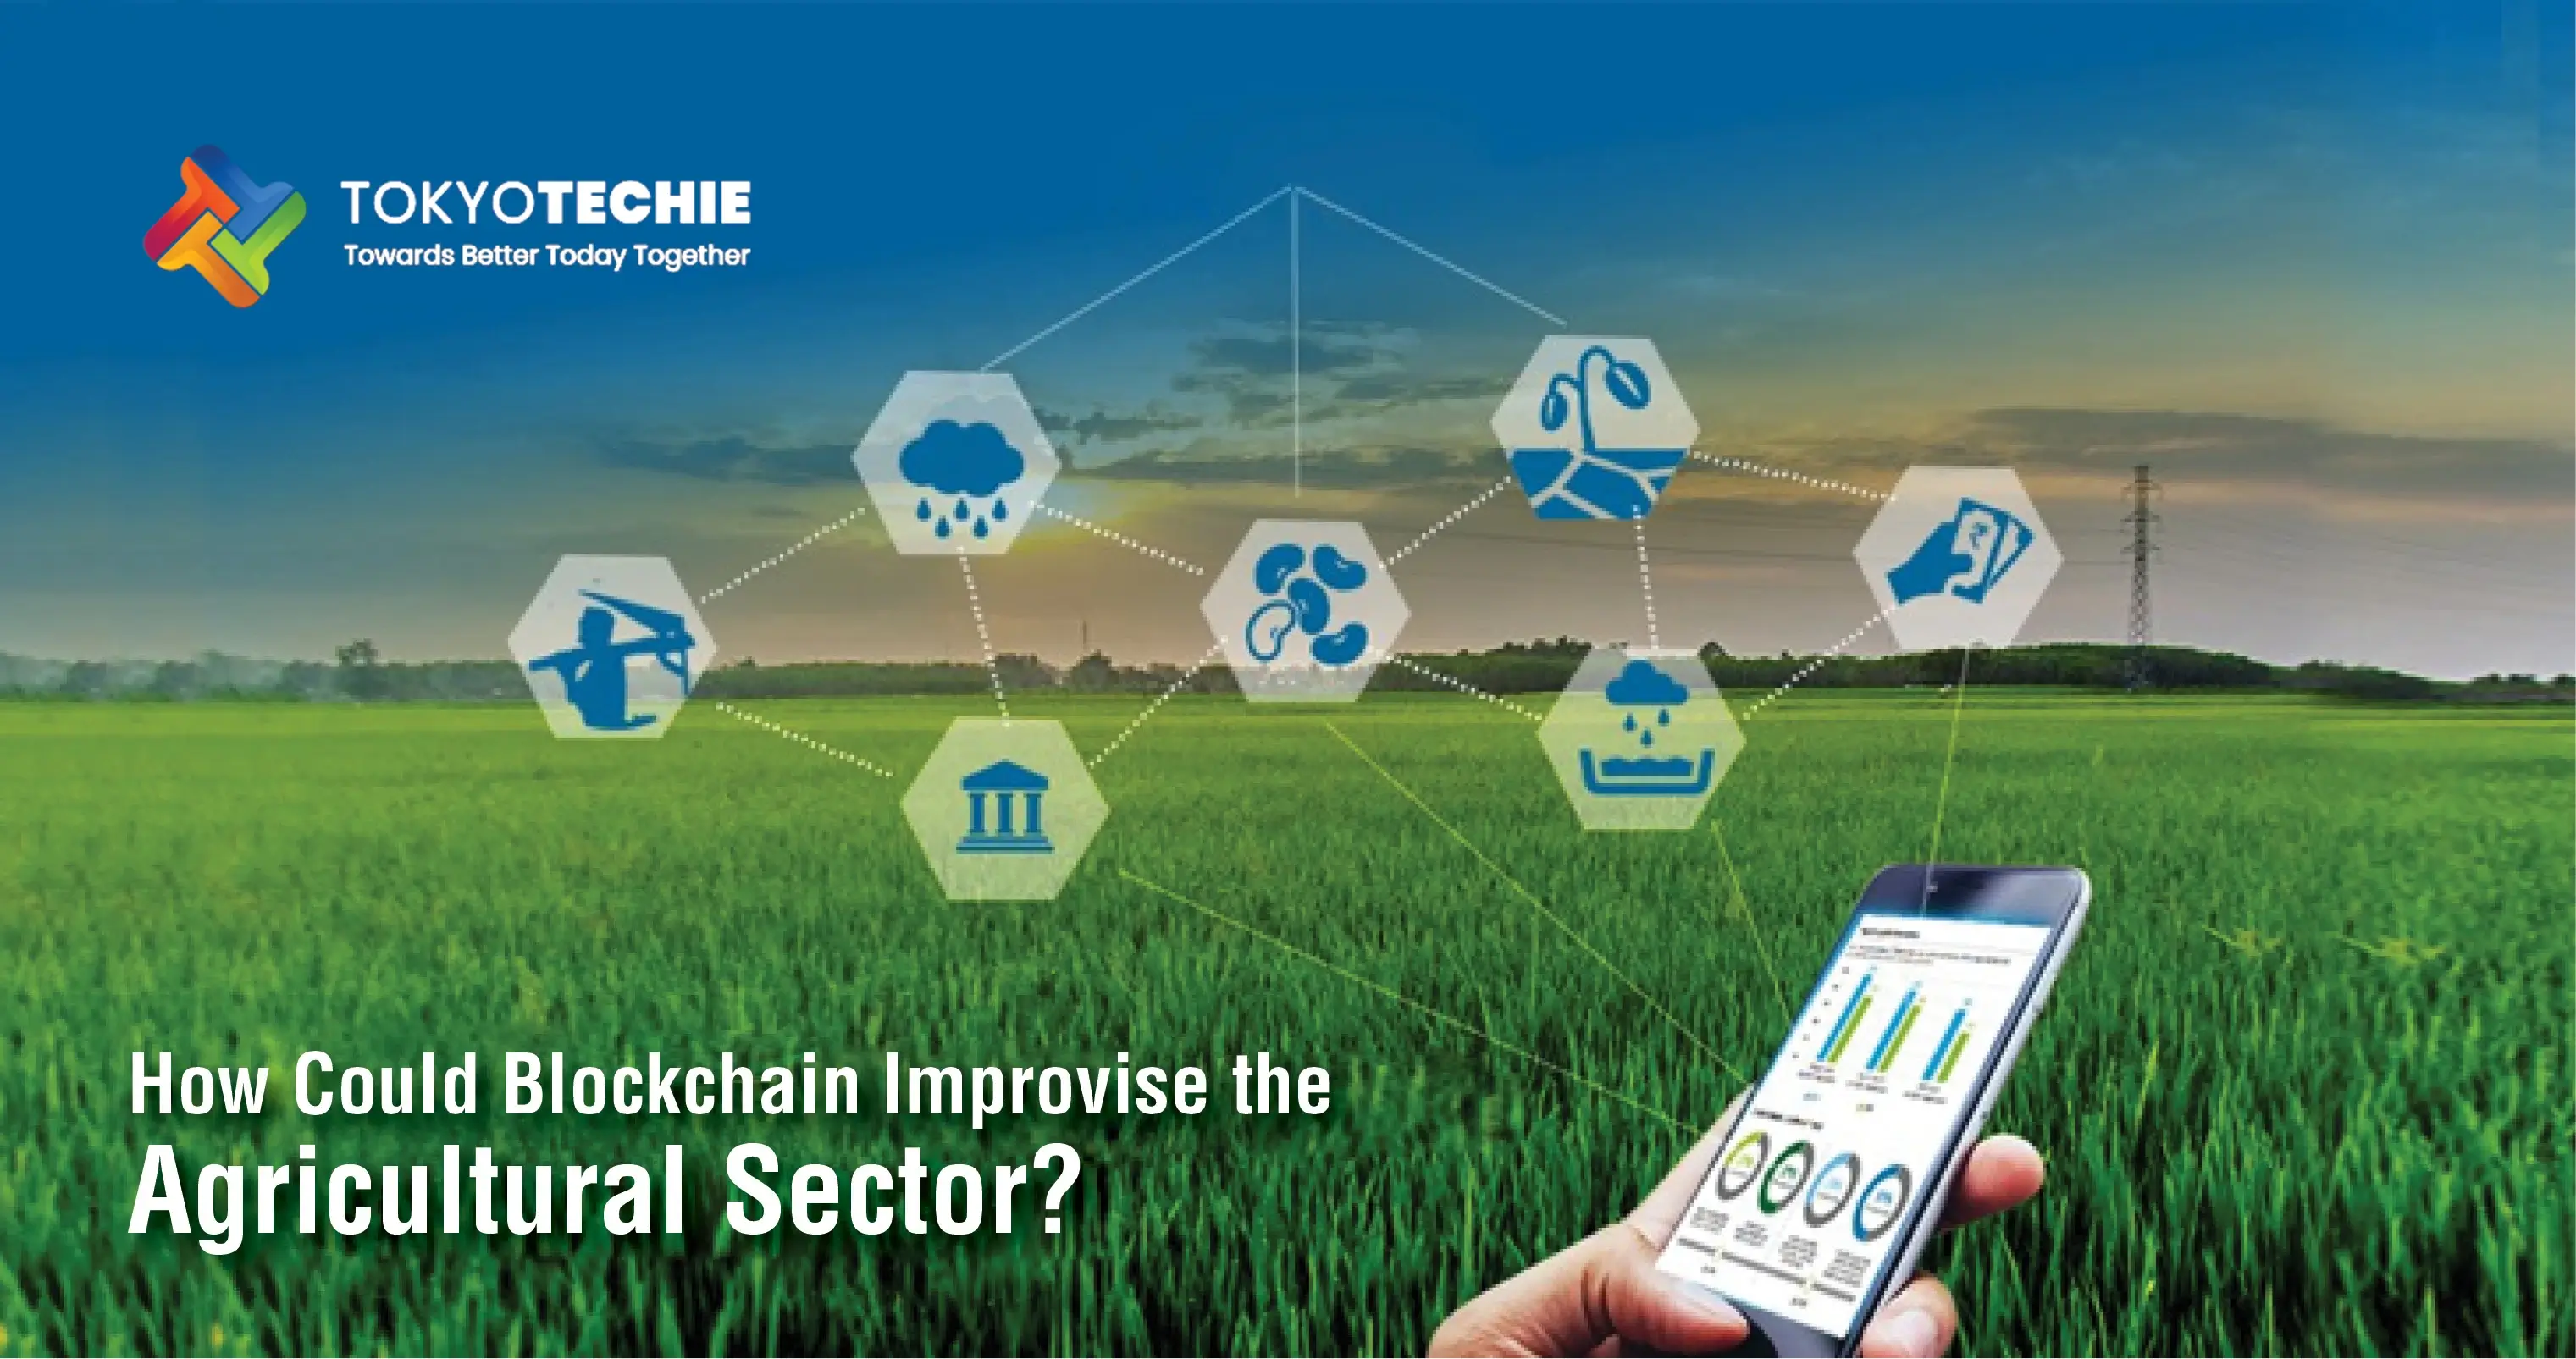 blogs/viewblog/how-could-blockchain-improvise-the-agricultural-sector